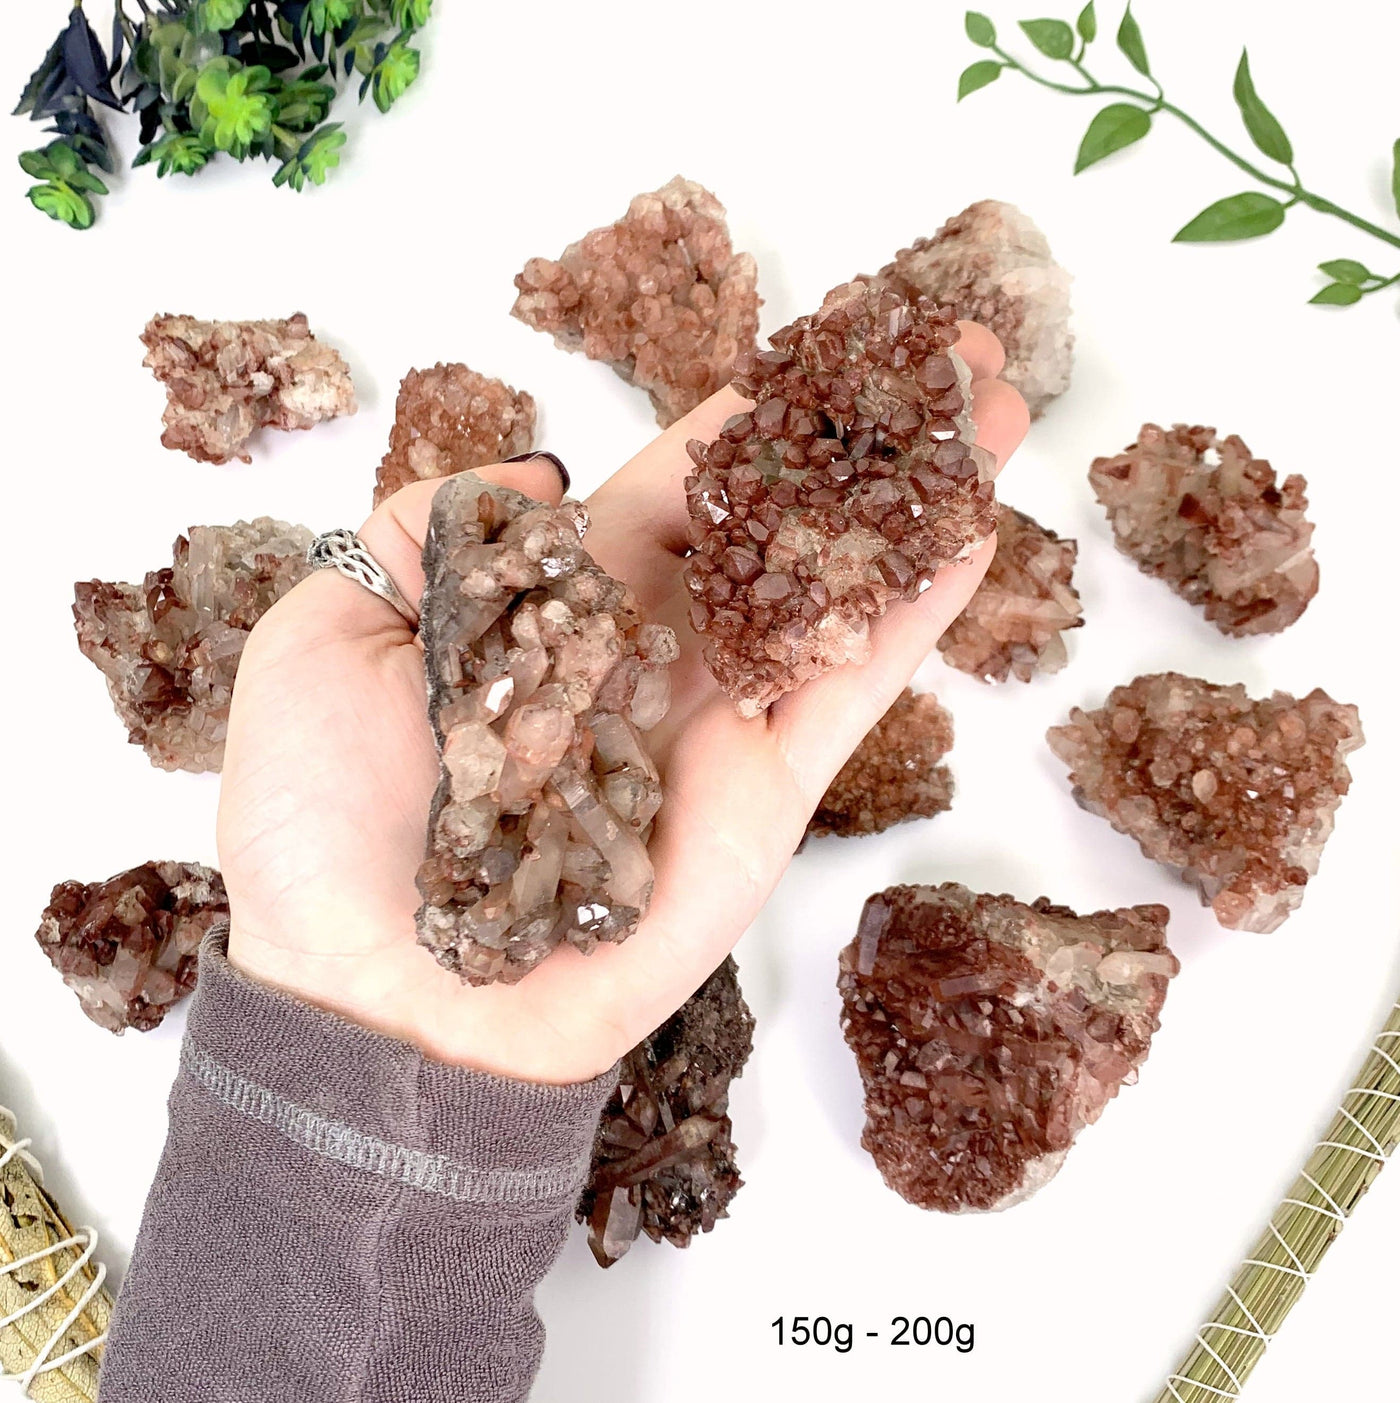 150 gram to 200 gram lithium quartz clusters 2 pieces fit in the palm of a man's hand